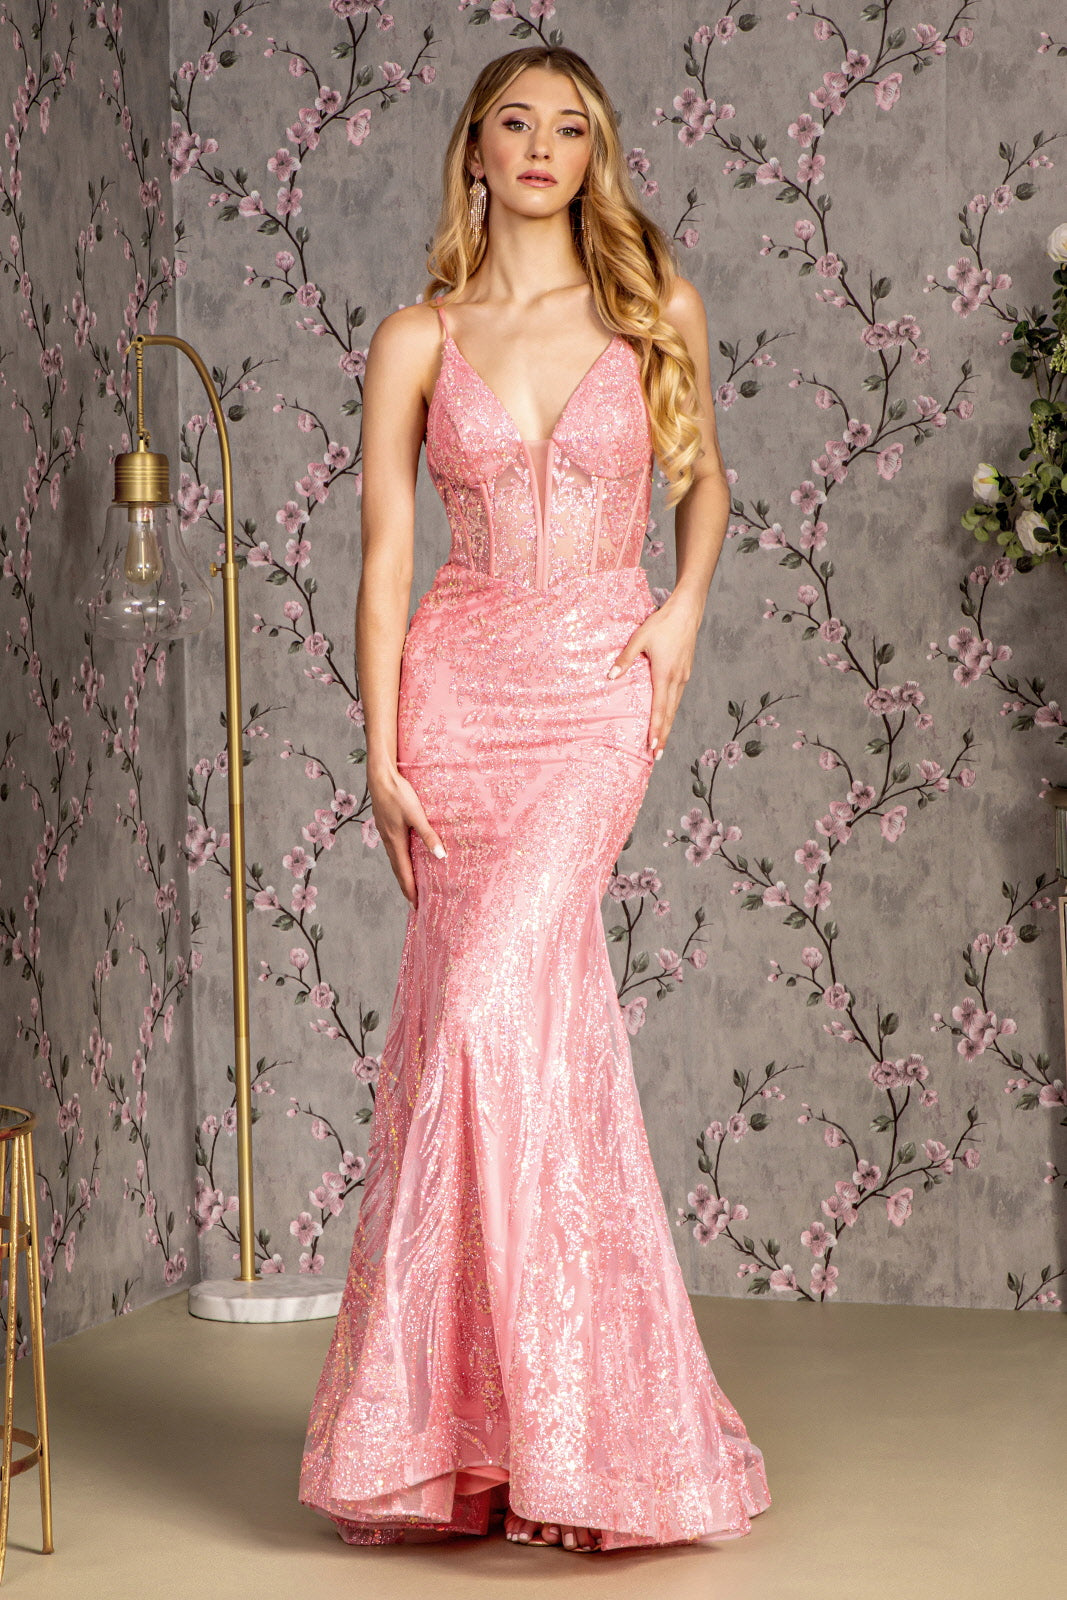 Prom Dresses Sequin Sheer Corset Bodice Mermaid Long Prom Dress Coral